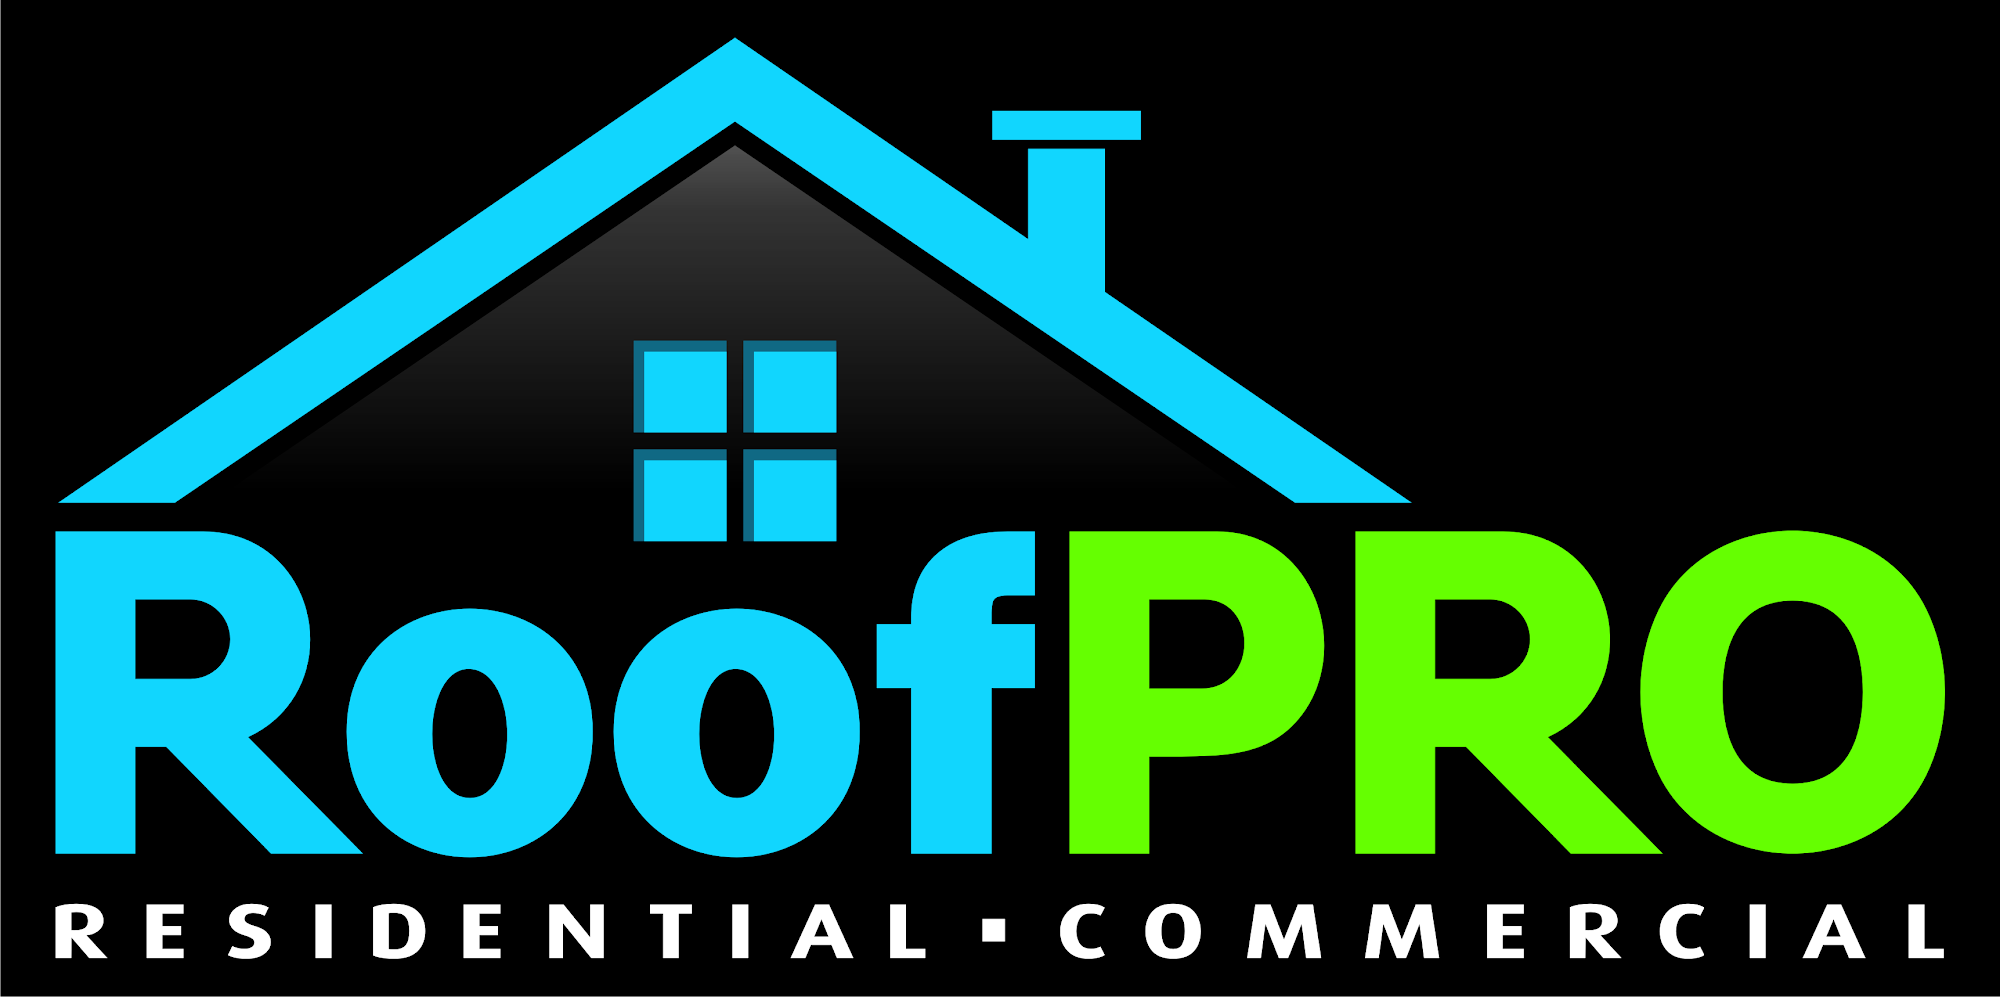 RoofPRO